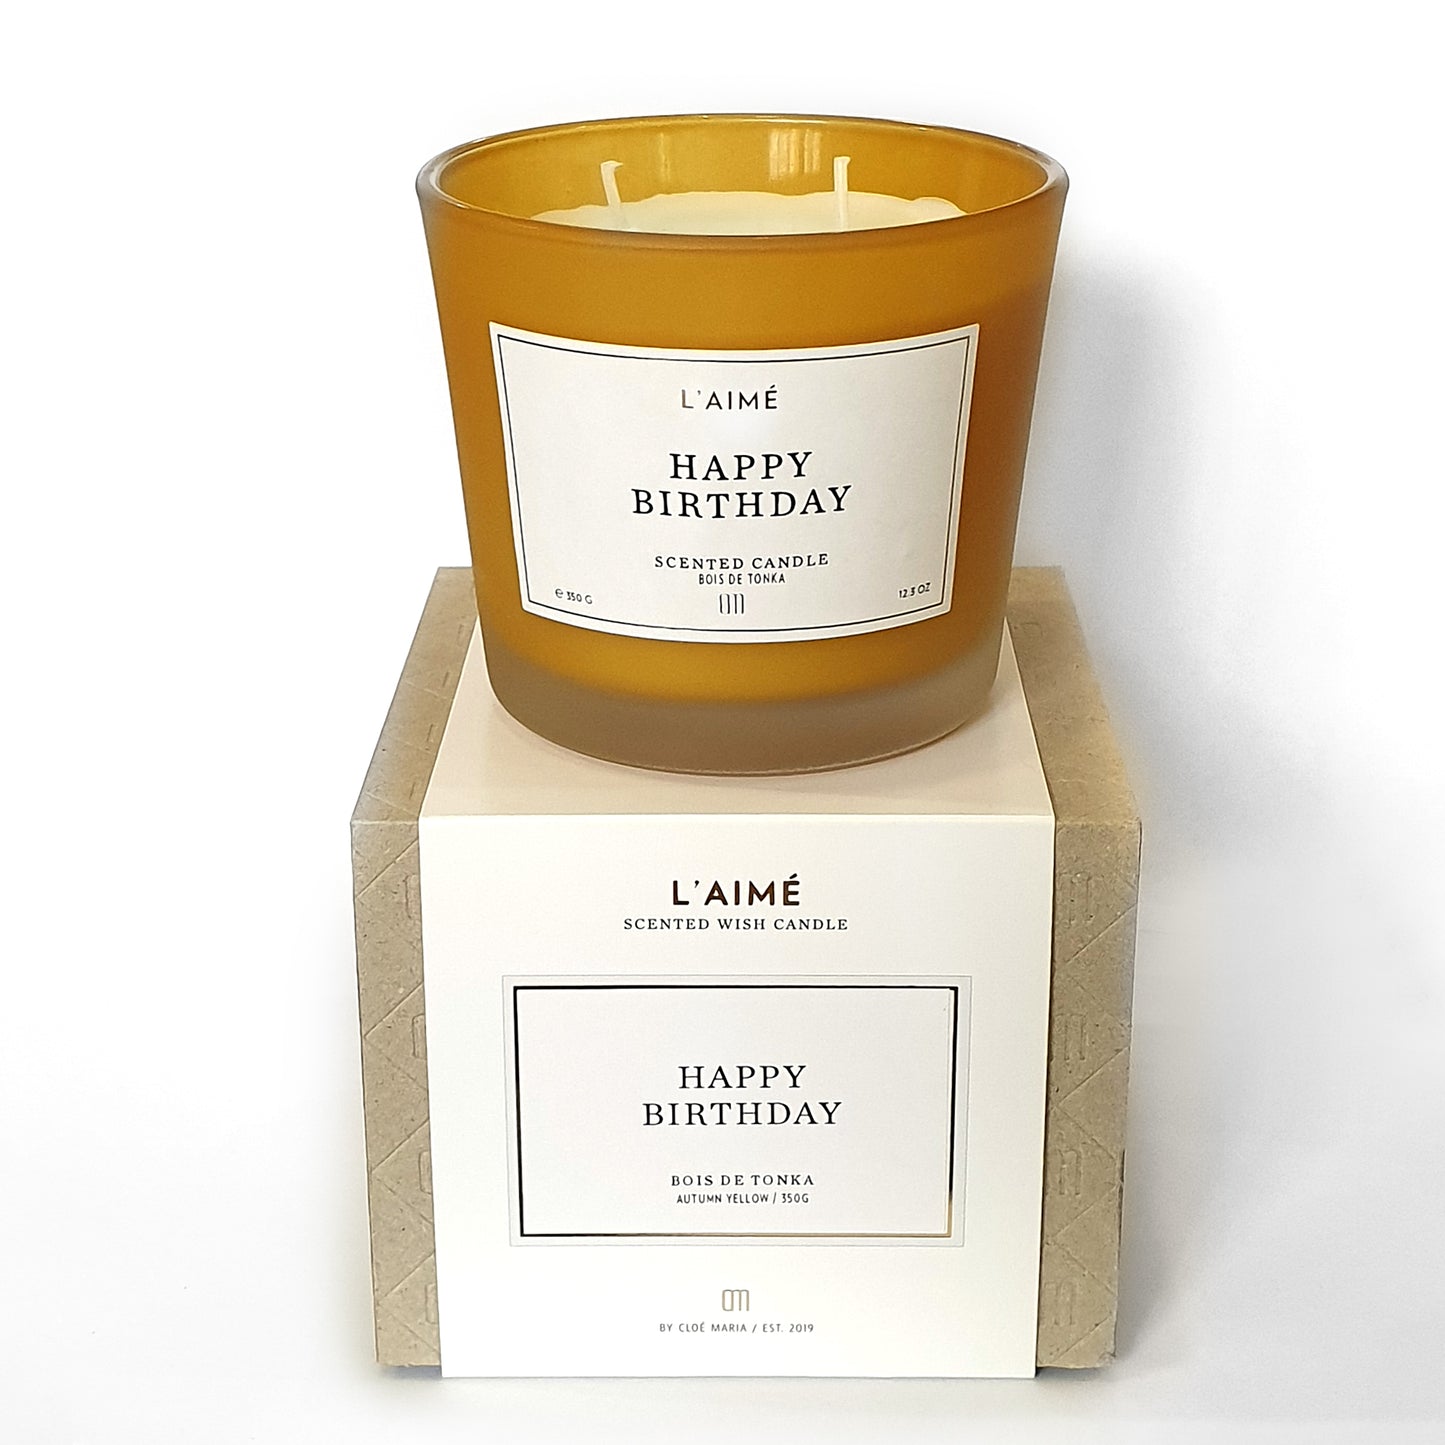 L'aime Scented Candle - "Happy Birthday"